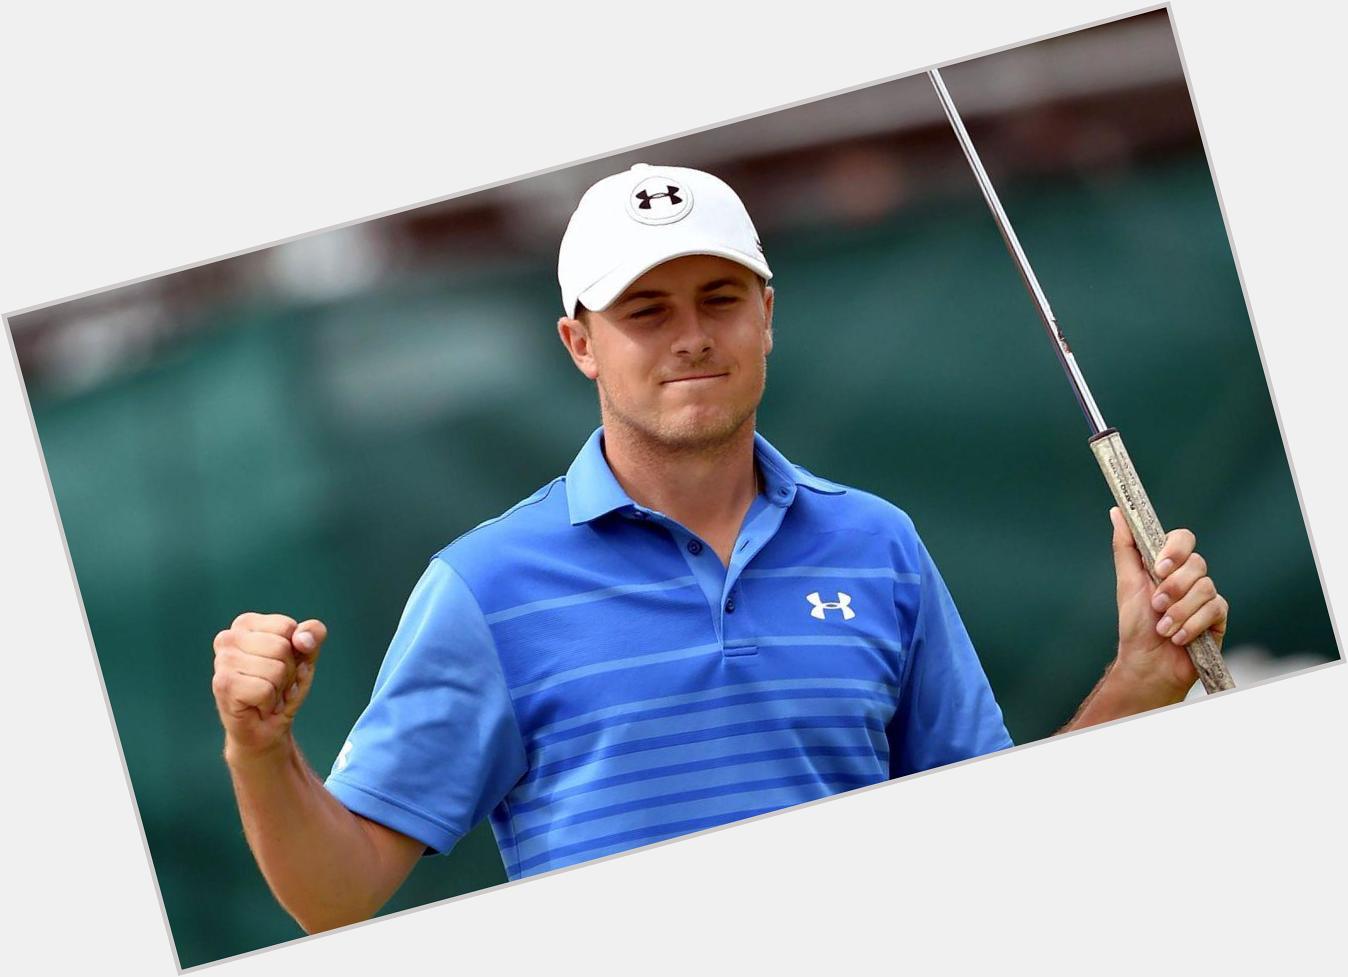 Happy 22nd birthday to Jordan Spieth! What an impressive start to his young career.  